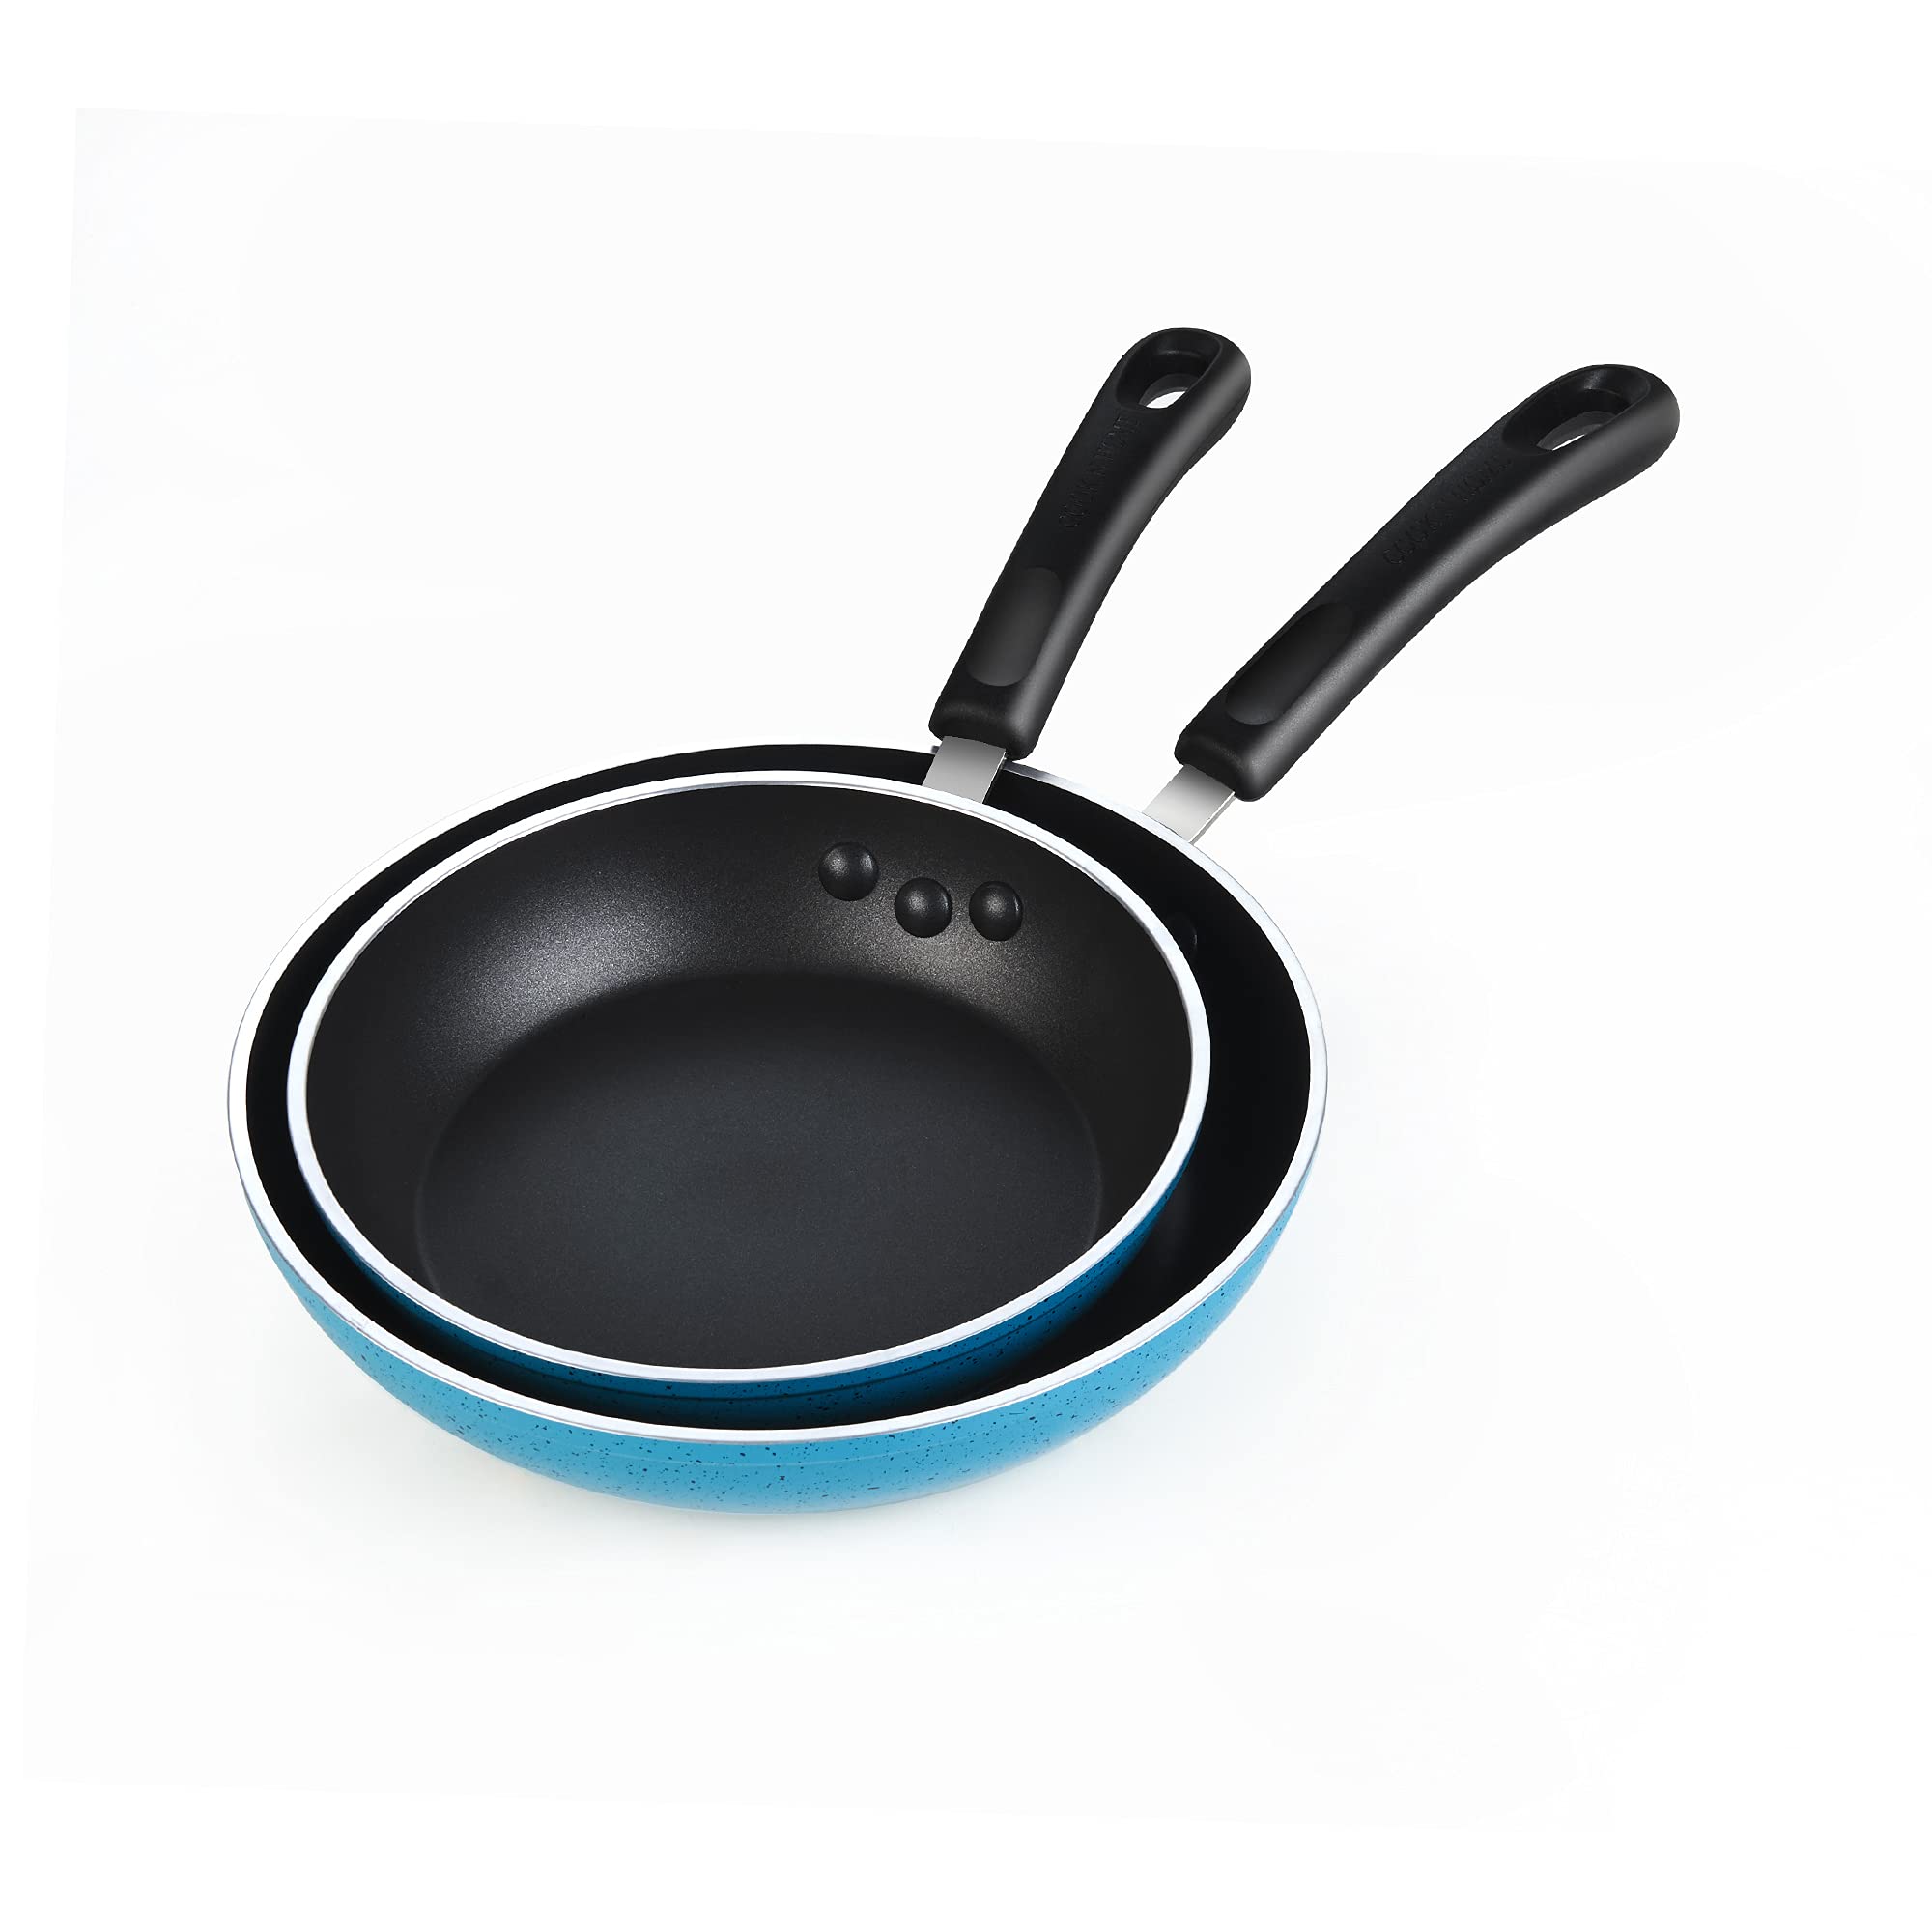 Cook N Home Nonstick Cookware Belly Shape 10-Piece, Turquoise